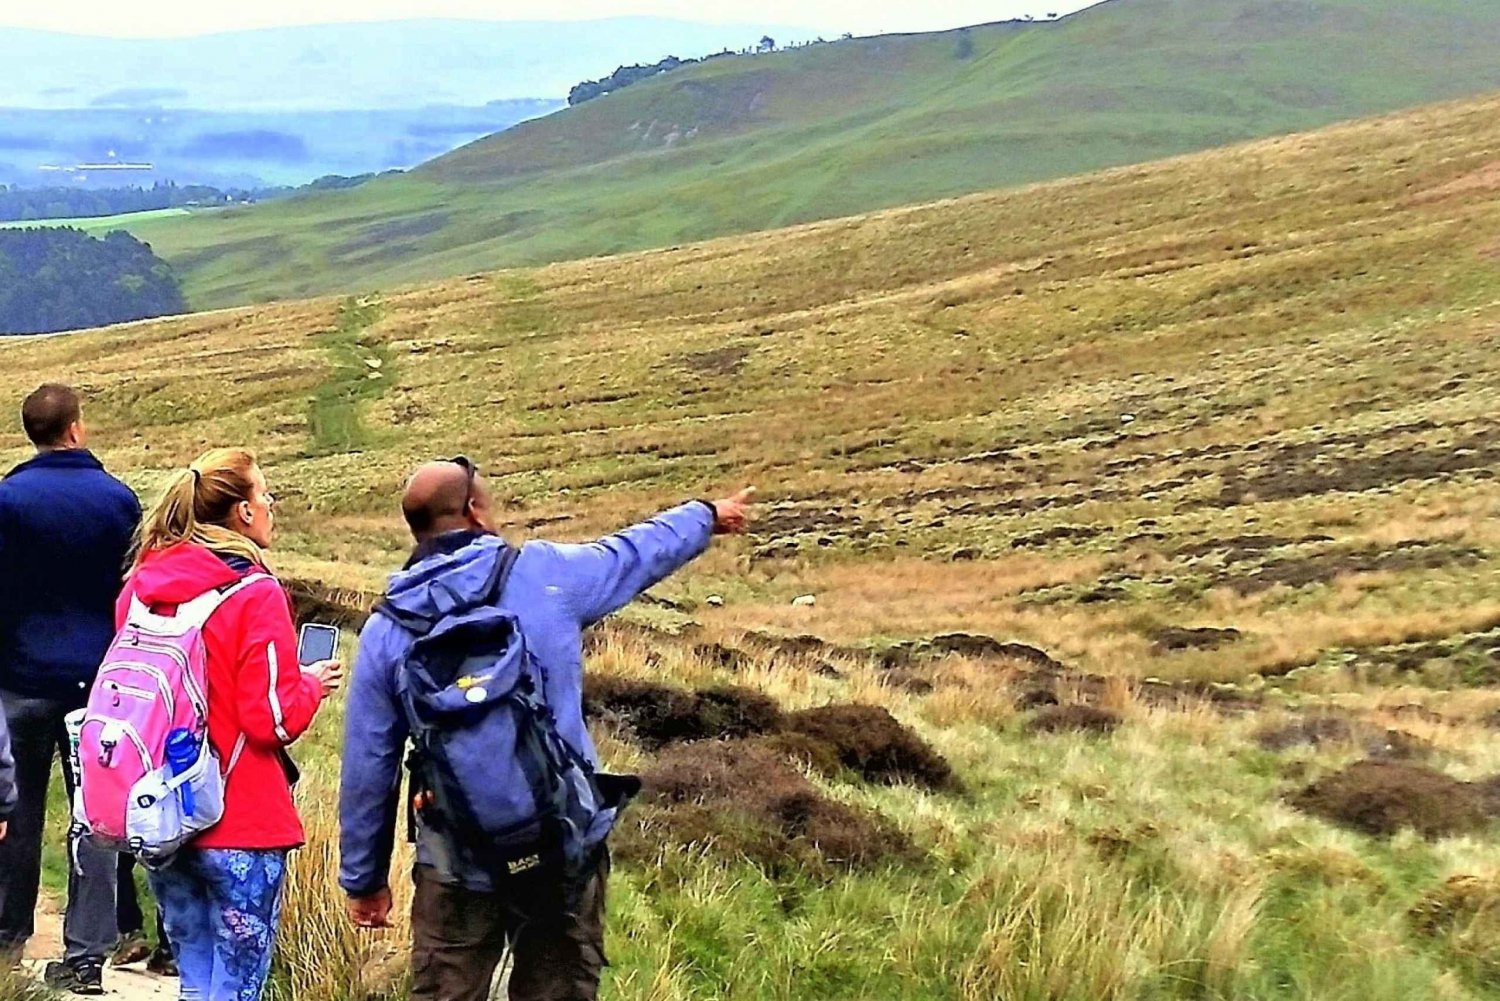 Hill & Nature Hike - Discover Real Edinburgh With a Local